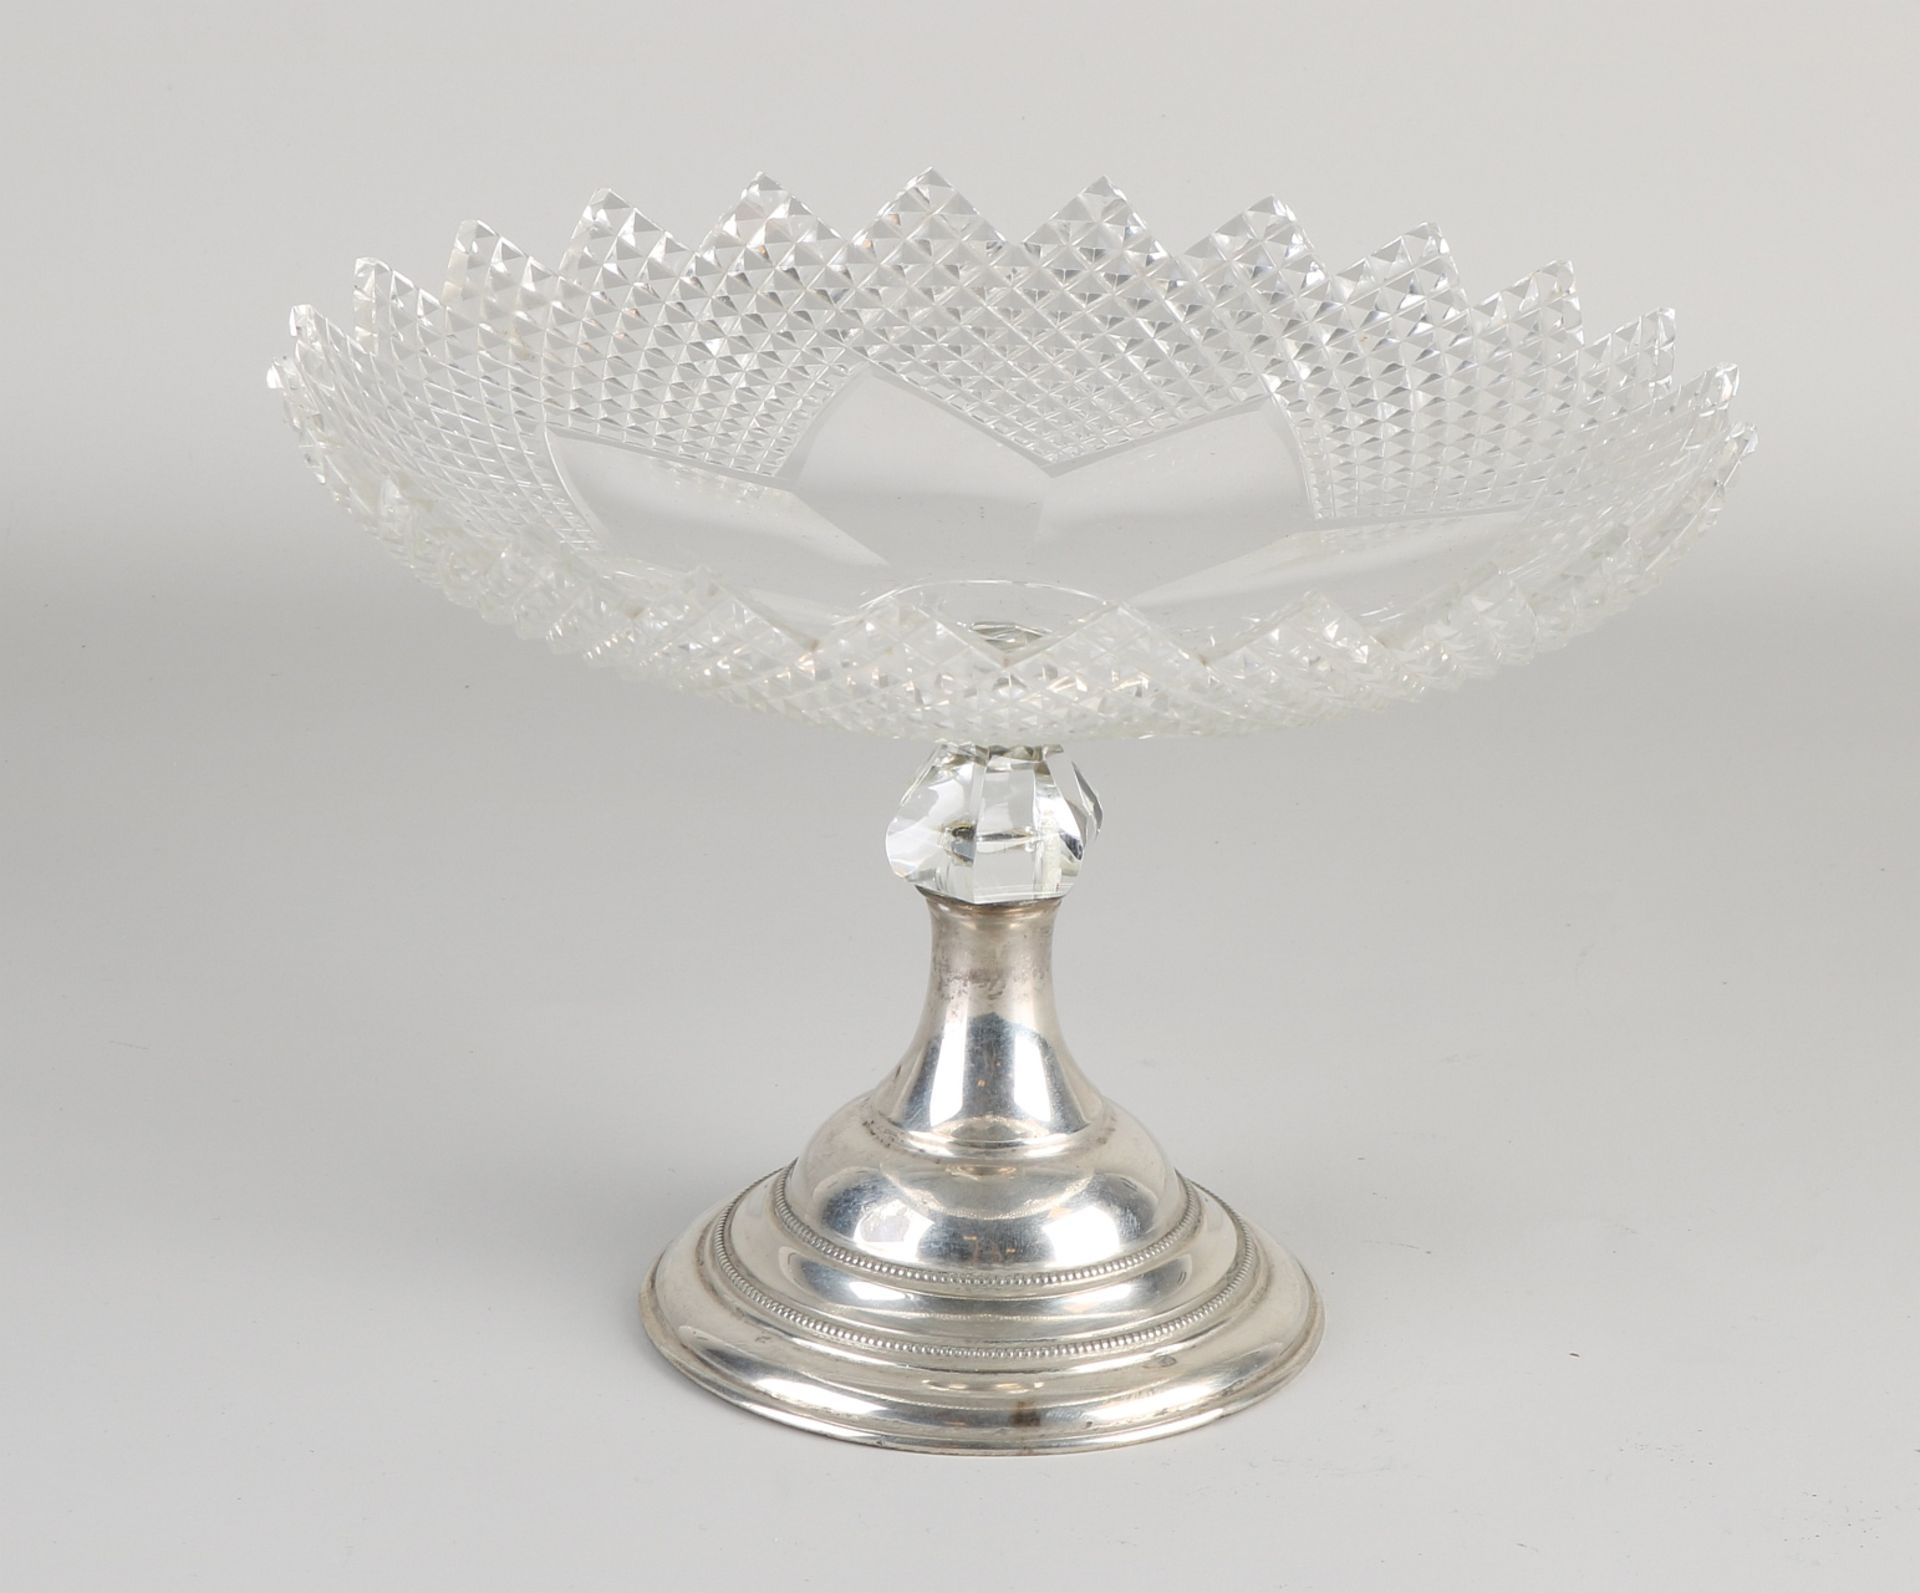 Crystal tazza on a silver base - Image 2 of 2